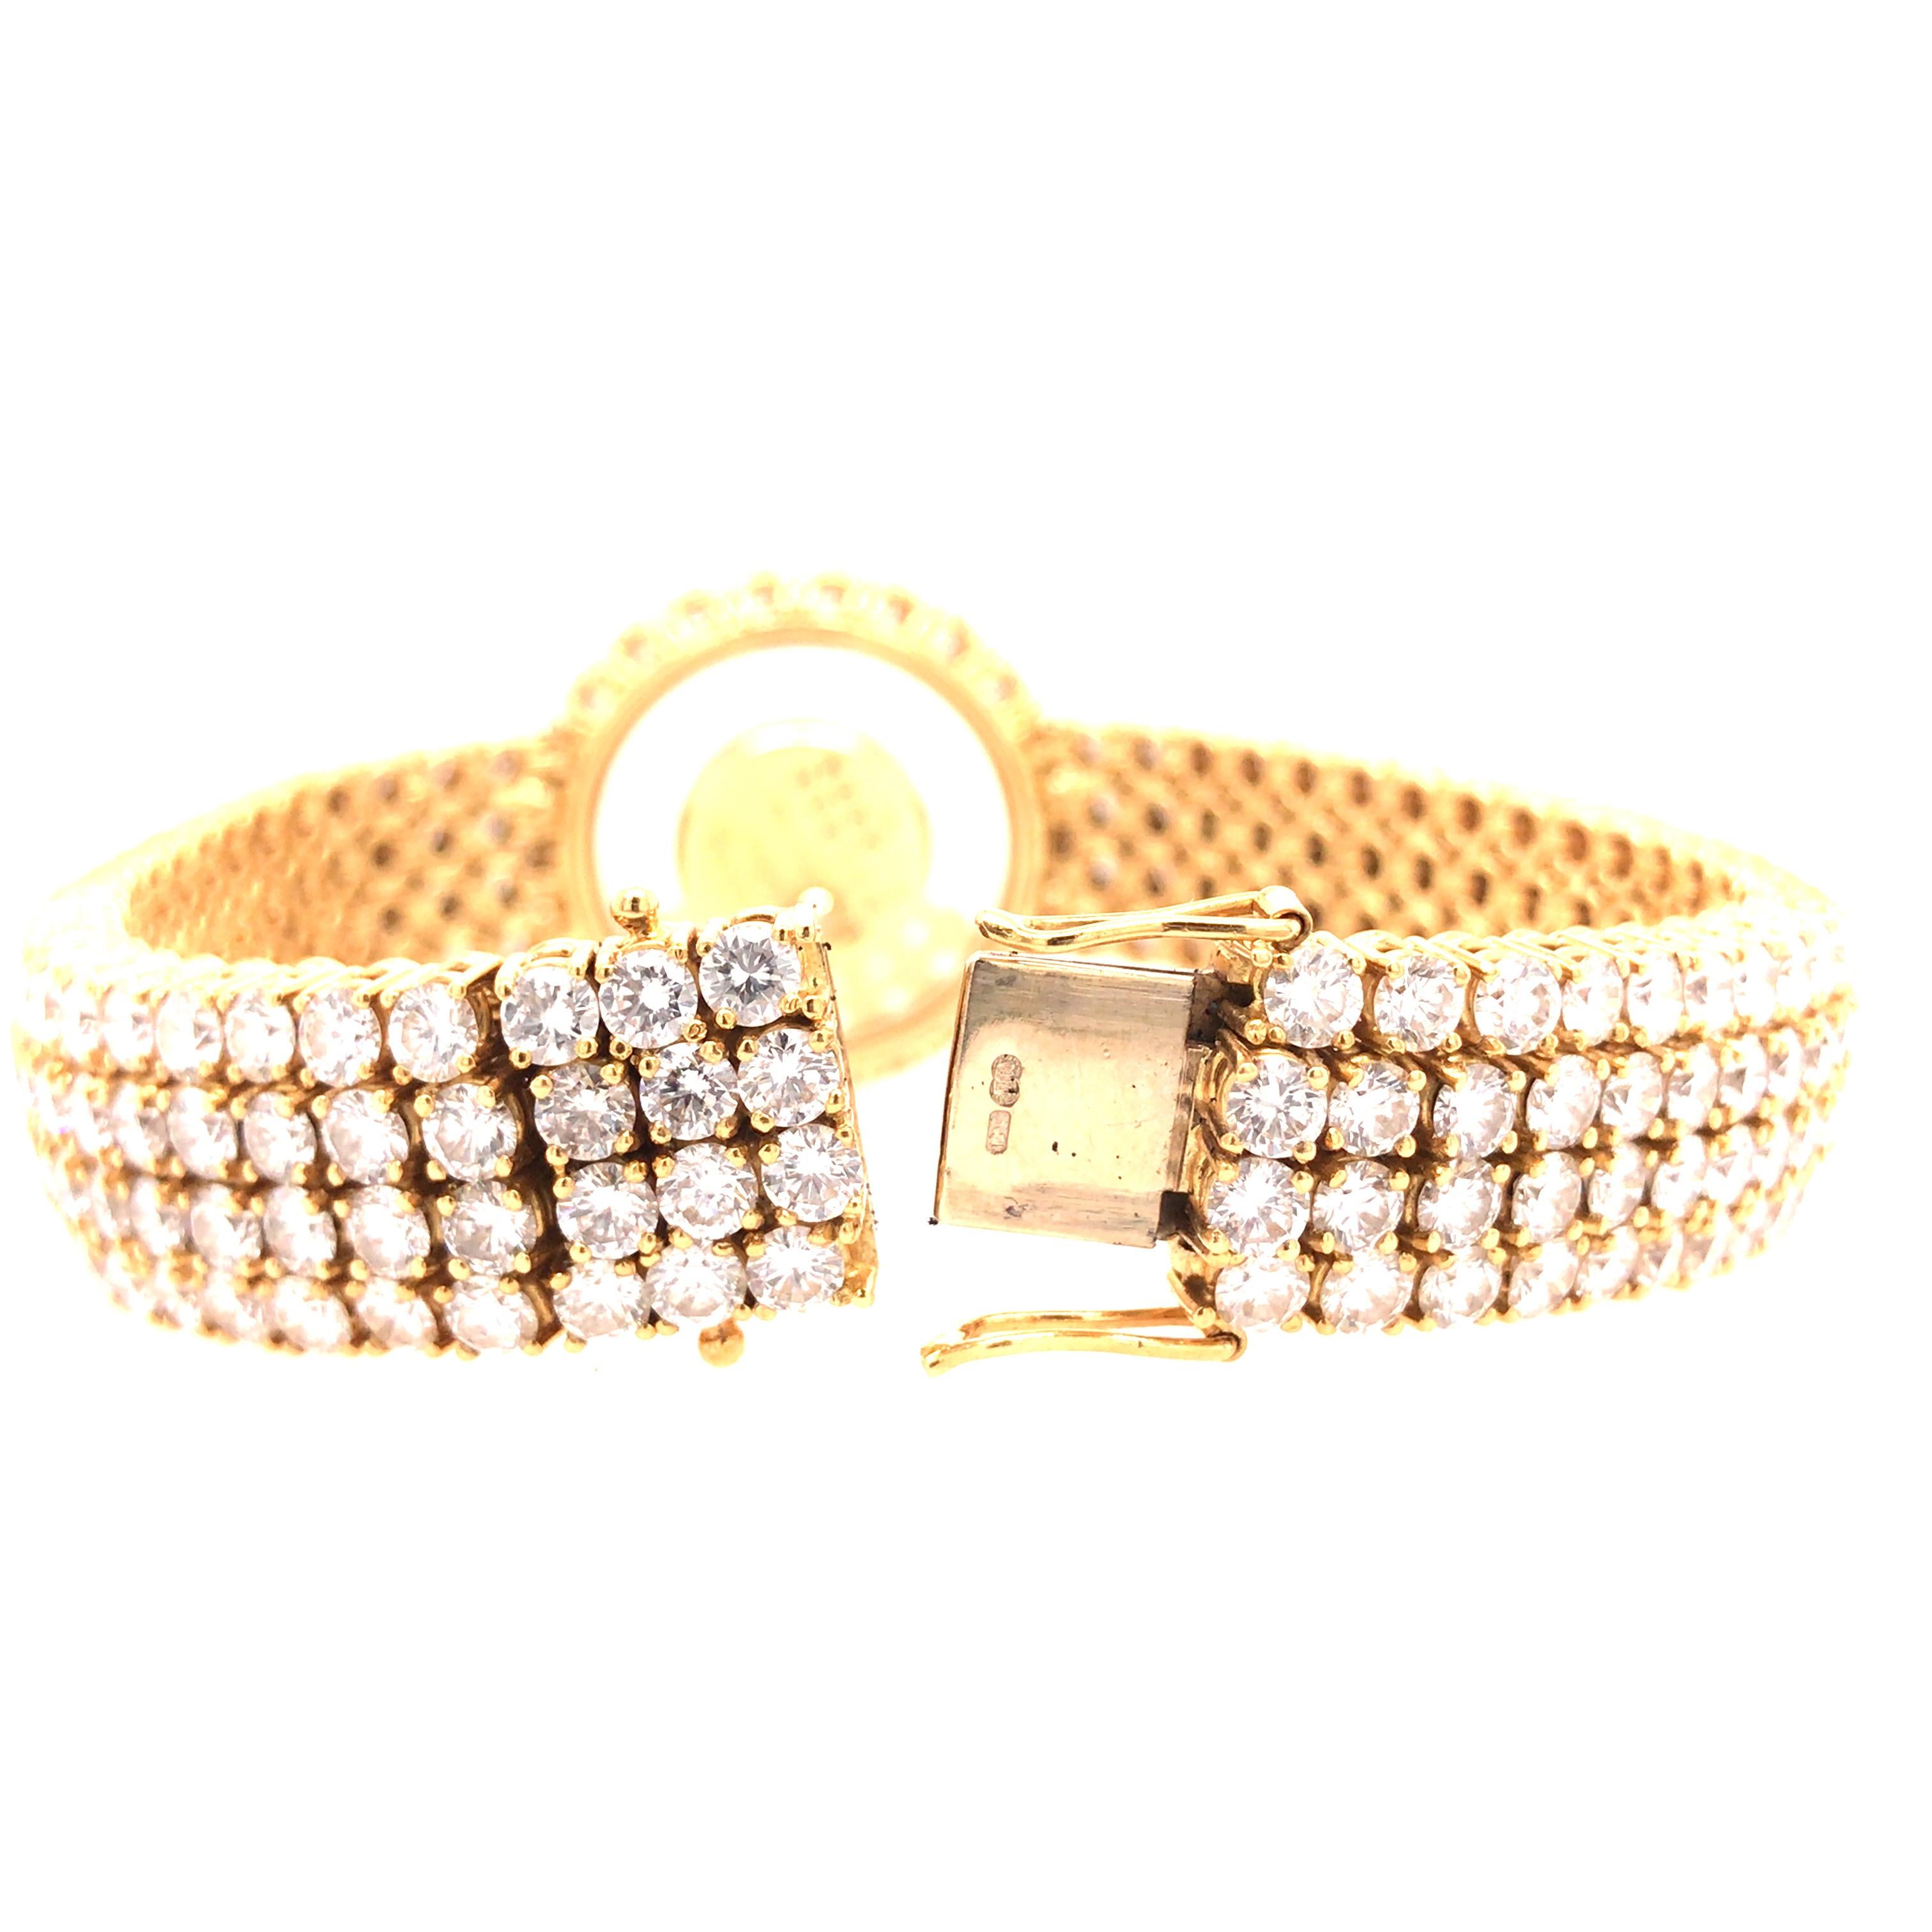 Chopard 24 Carat Happy Diamond Watch 18K Yellow Gold In Excellent Condition For Sale In Boca Raton, FL